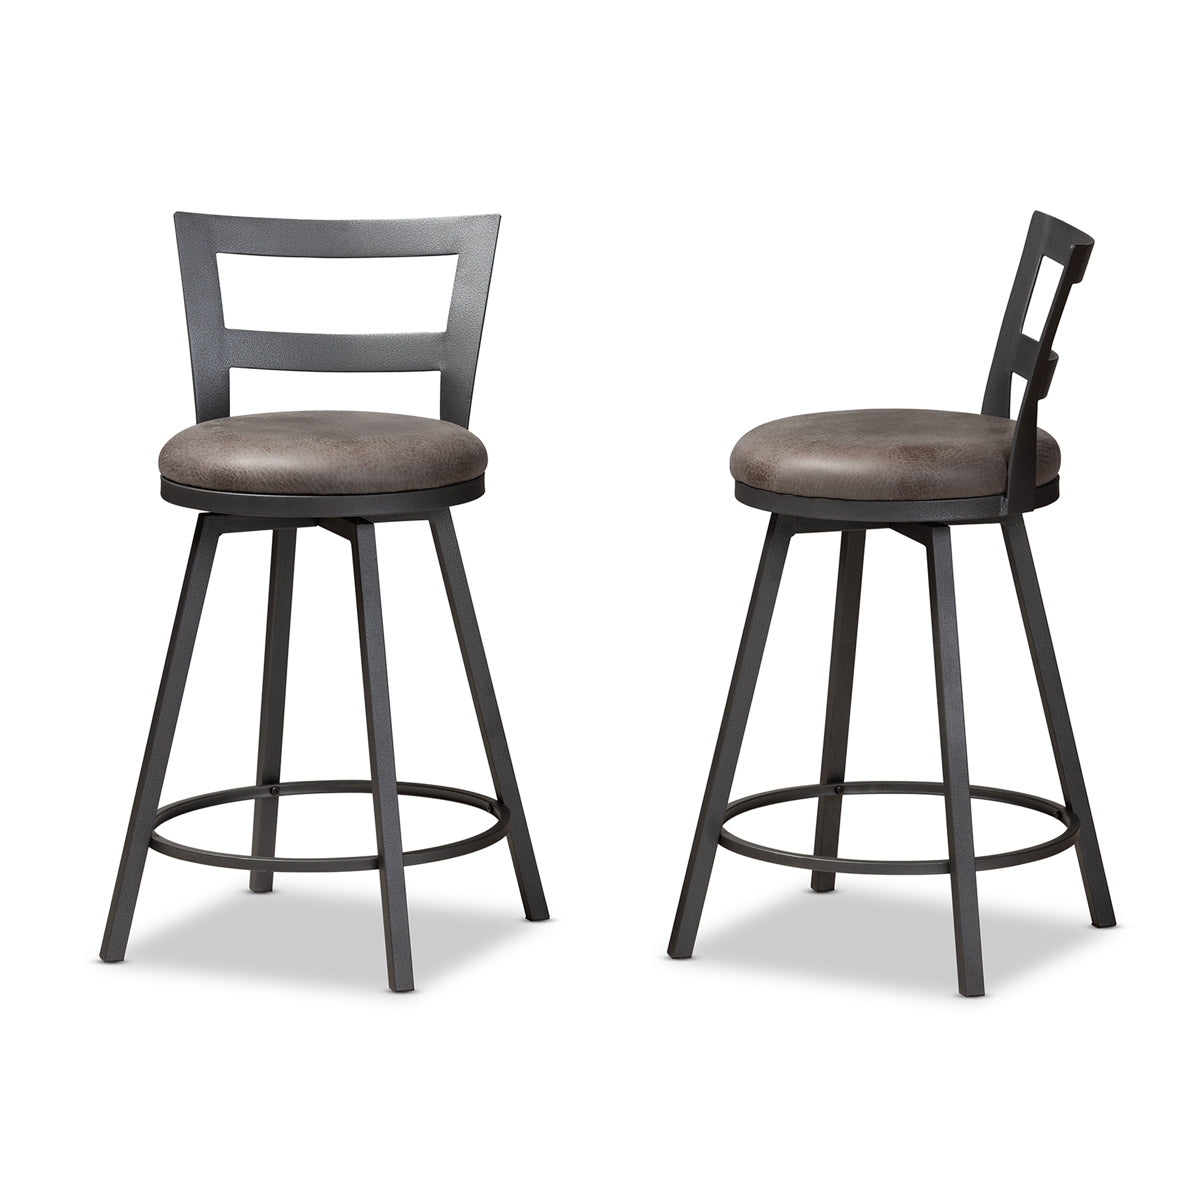 Baxton Studio Arjean Rustic and Industrial Grey Fabric Upholstered Counter Stool Set of 2 Baxton Studio-0-Minimal And Modern - 3